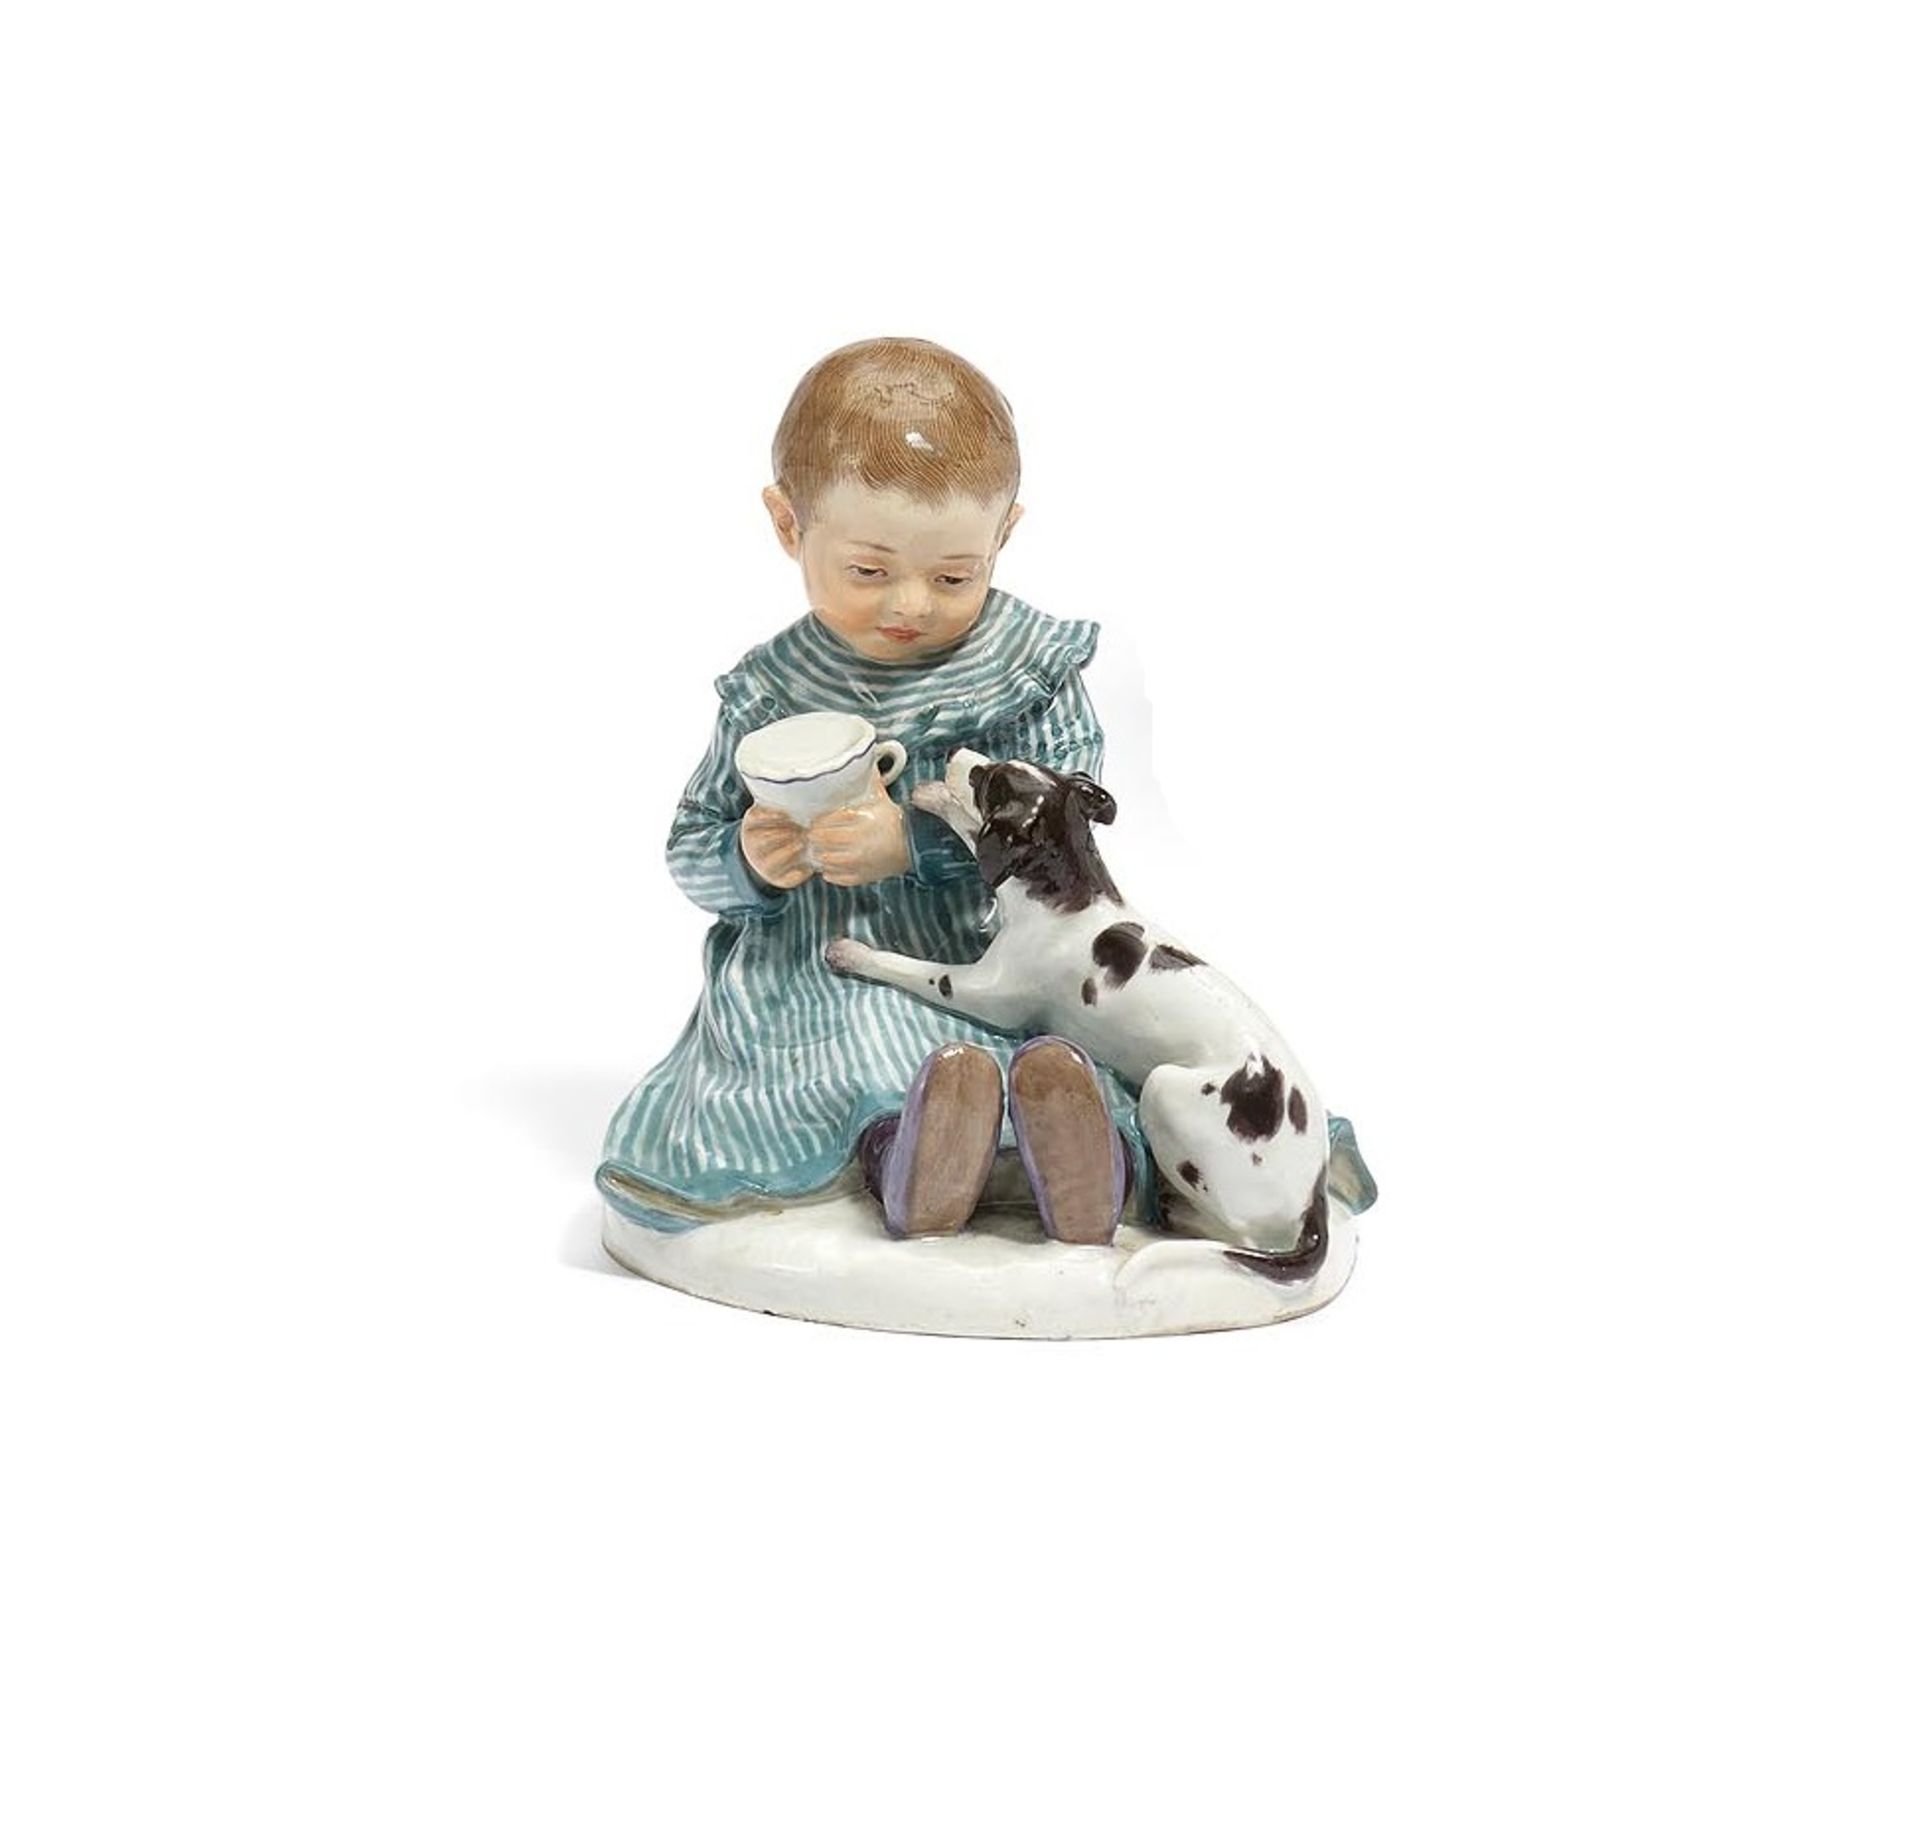 Meissen: PORCELAIN FIGURINE OF A SMALL CHILD WITH CUP AND SMALL DOG